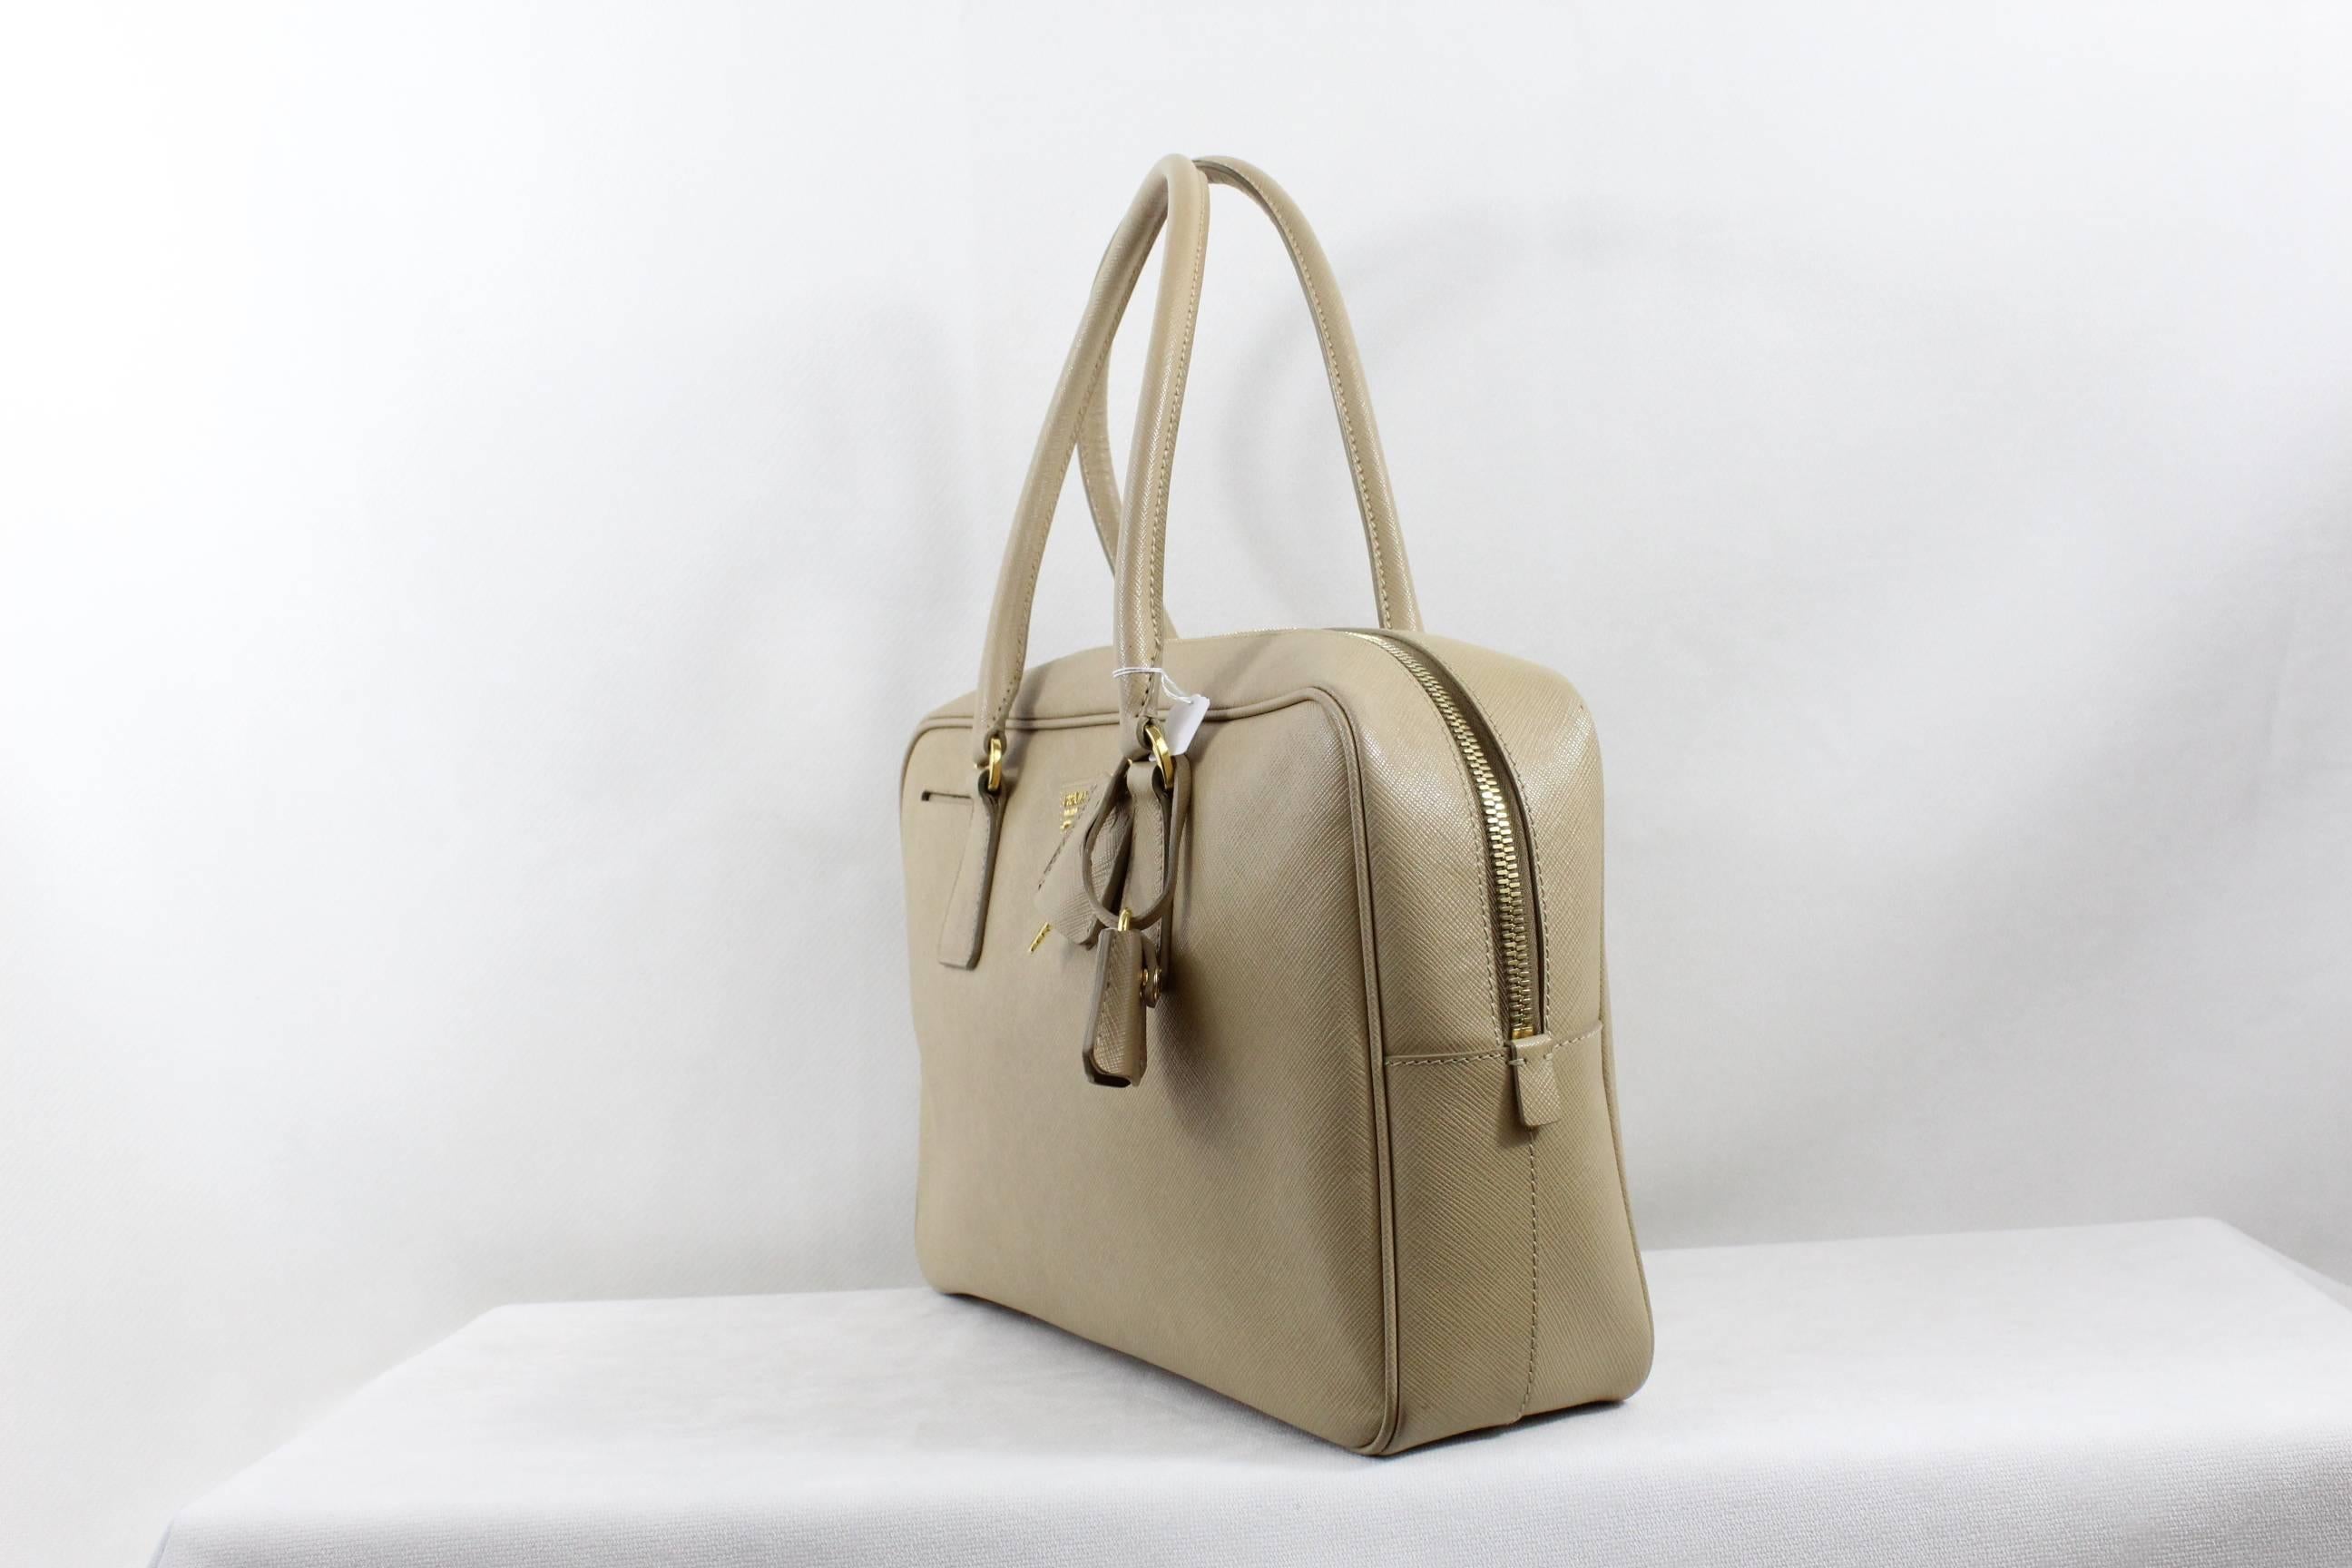 Iconic bag from Prada, shoulder bag in Safiano Beige leather.
excellent conditon, it has bee worn but corners or handles do not present signs of wear
Sold with dust bag ( one stain in the dust bag)
Keys and padlock